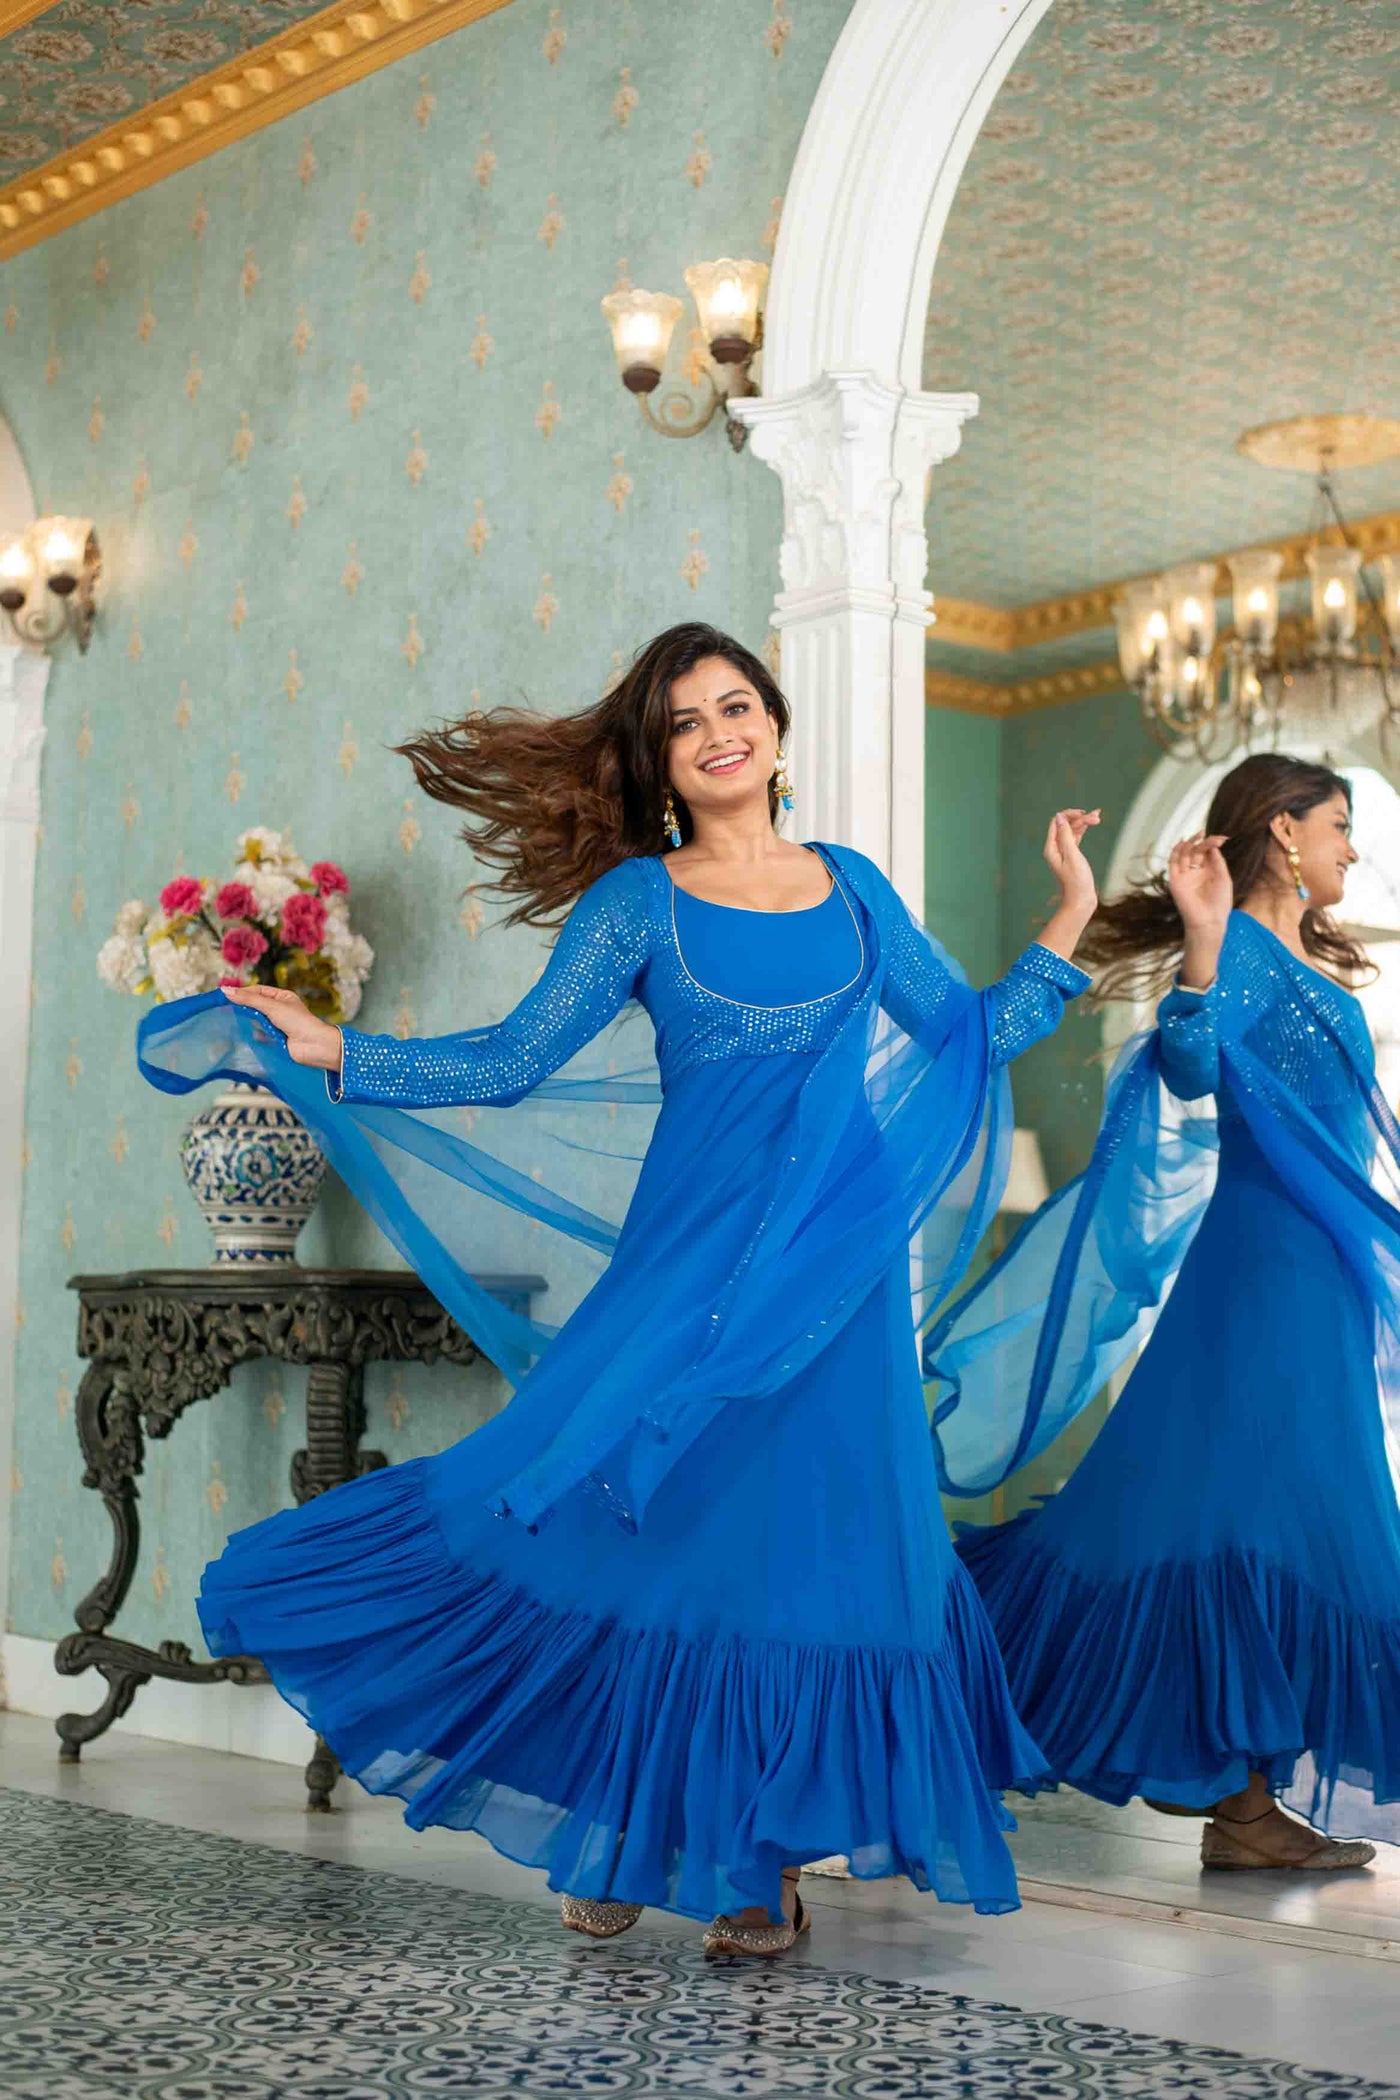 Electric Blue Choli Style Gown With Dupatta